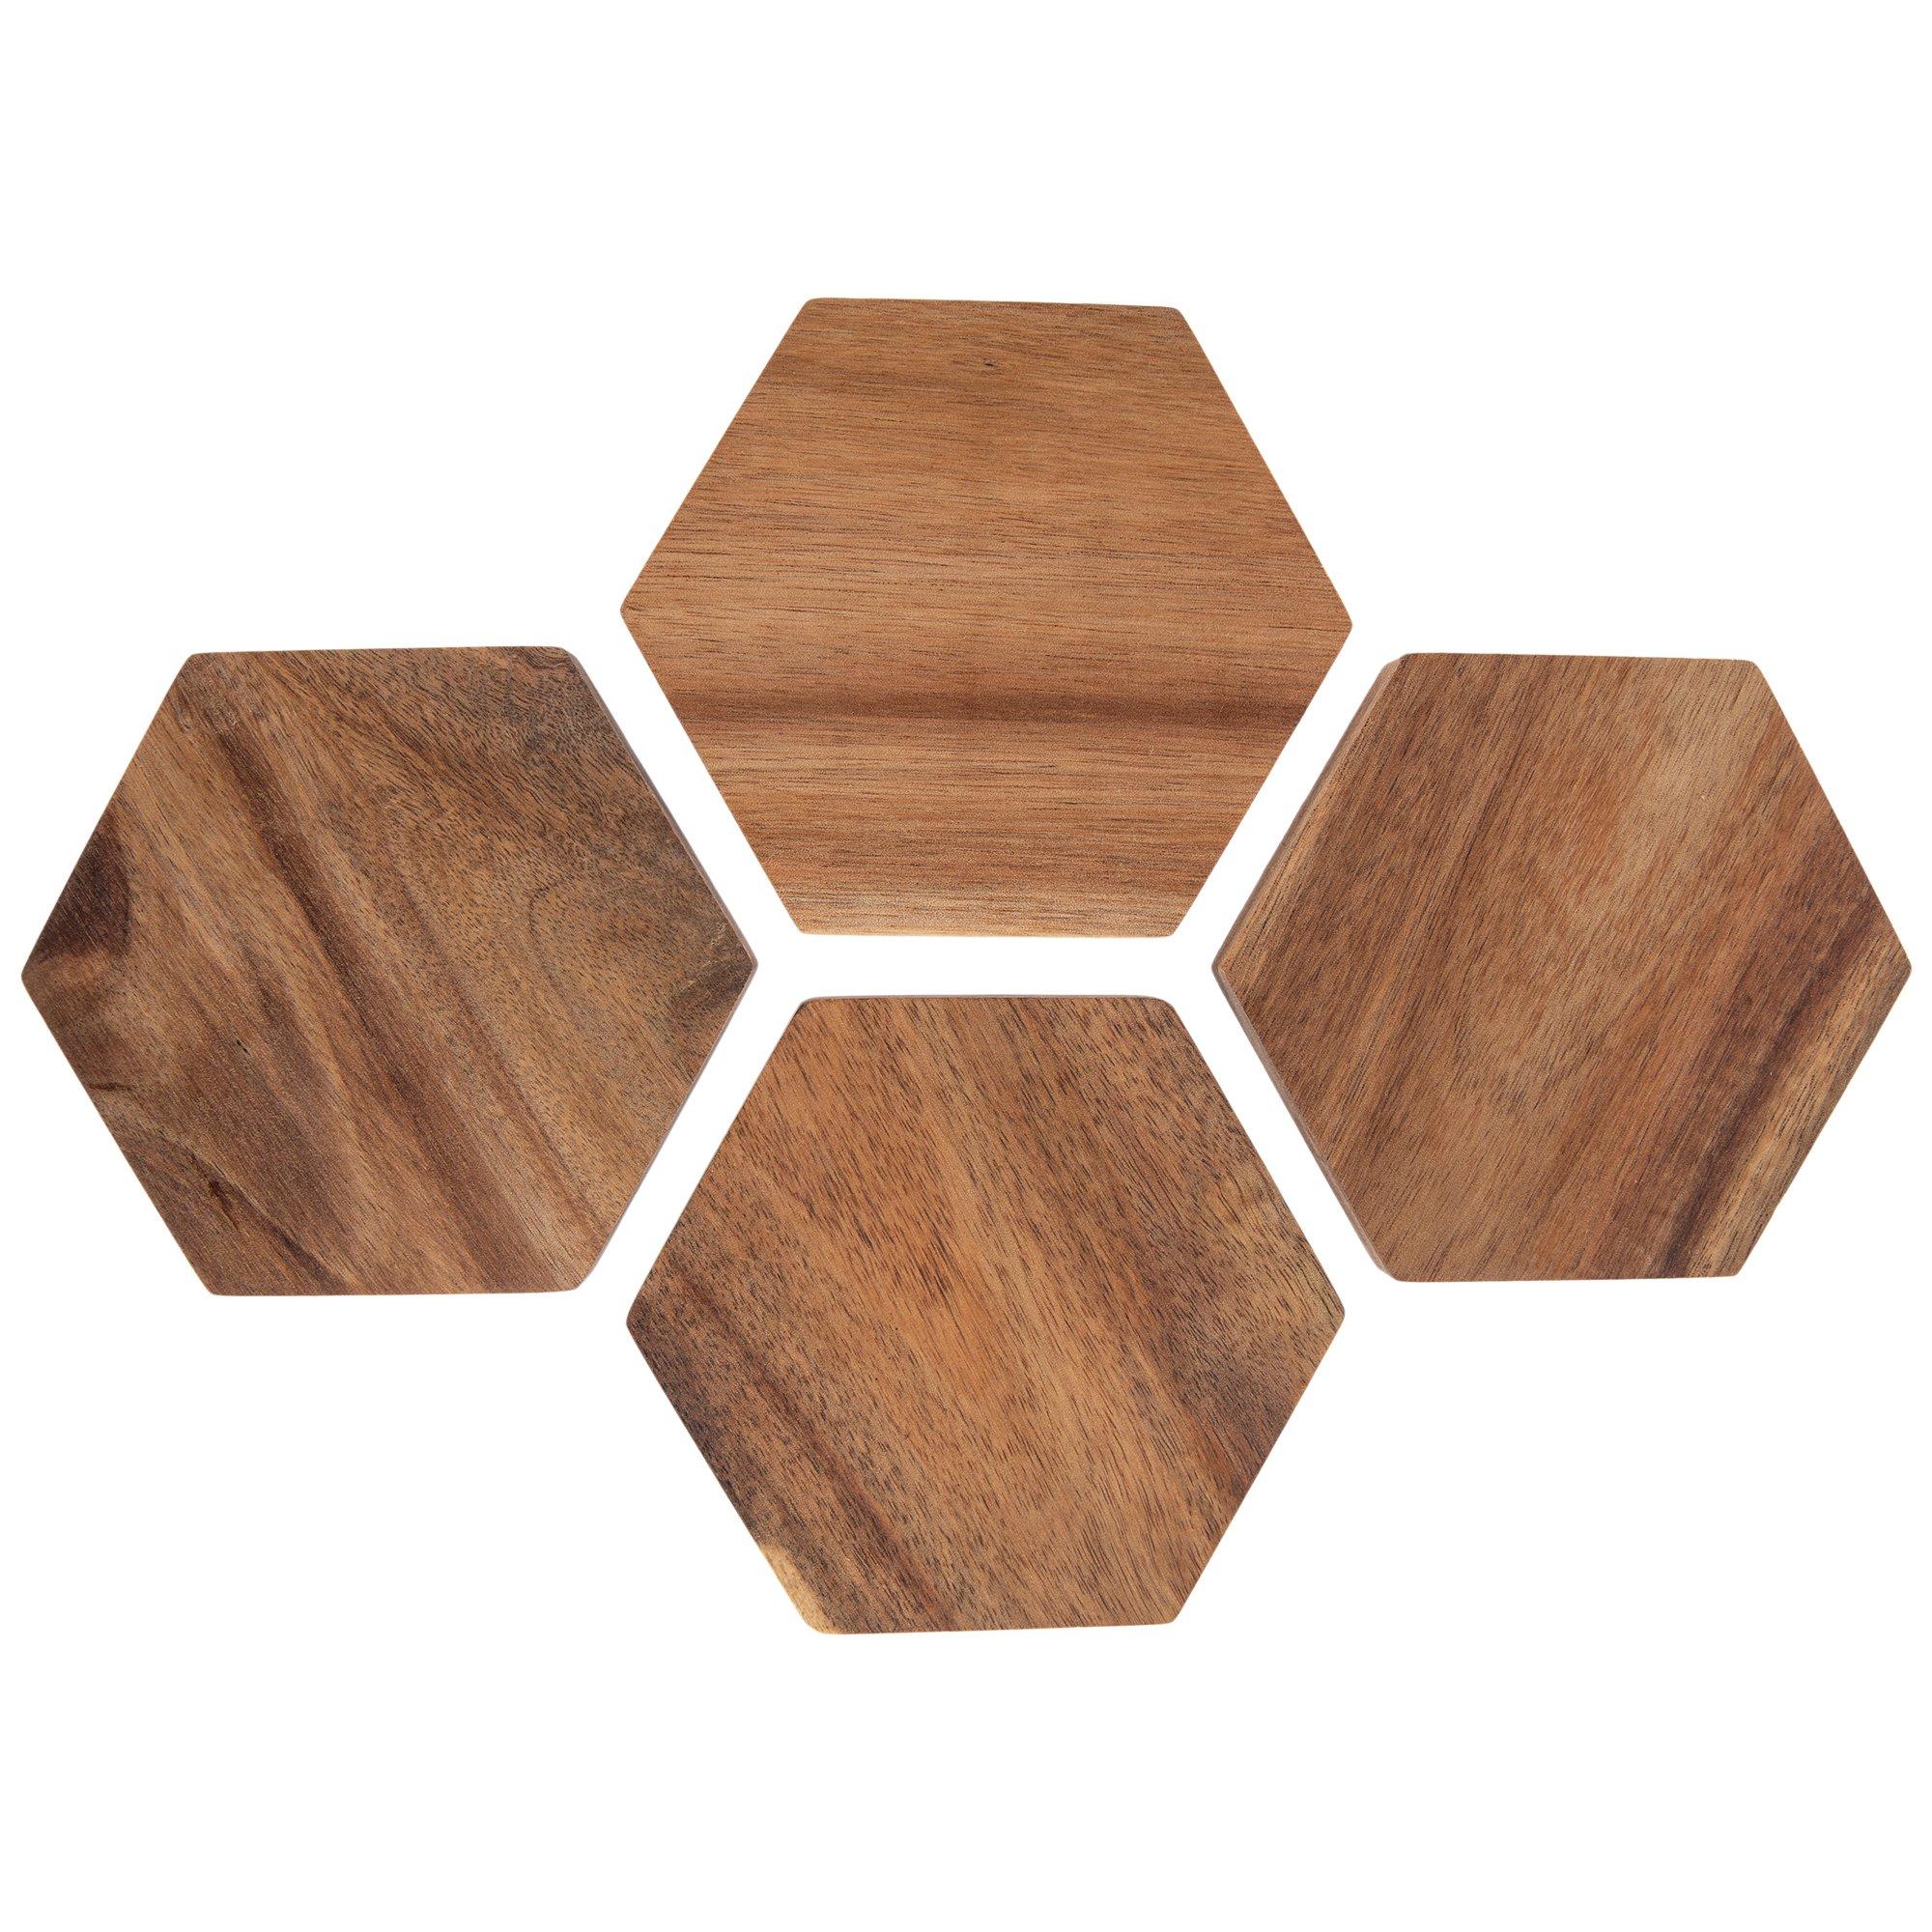 Welled Wood Coaster Hexagon 4 inch x 4.5 inch, 4 Piece, for Wooden Coasters, Crafts and Decorations, Welled Center for Resin Design or Paint - for